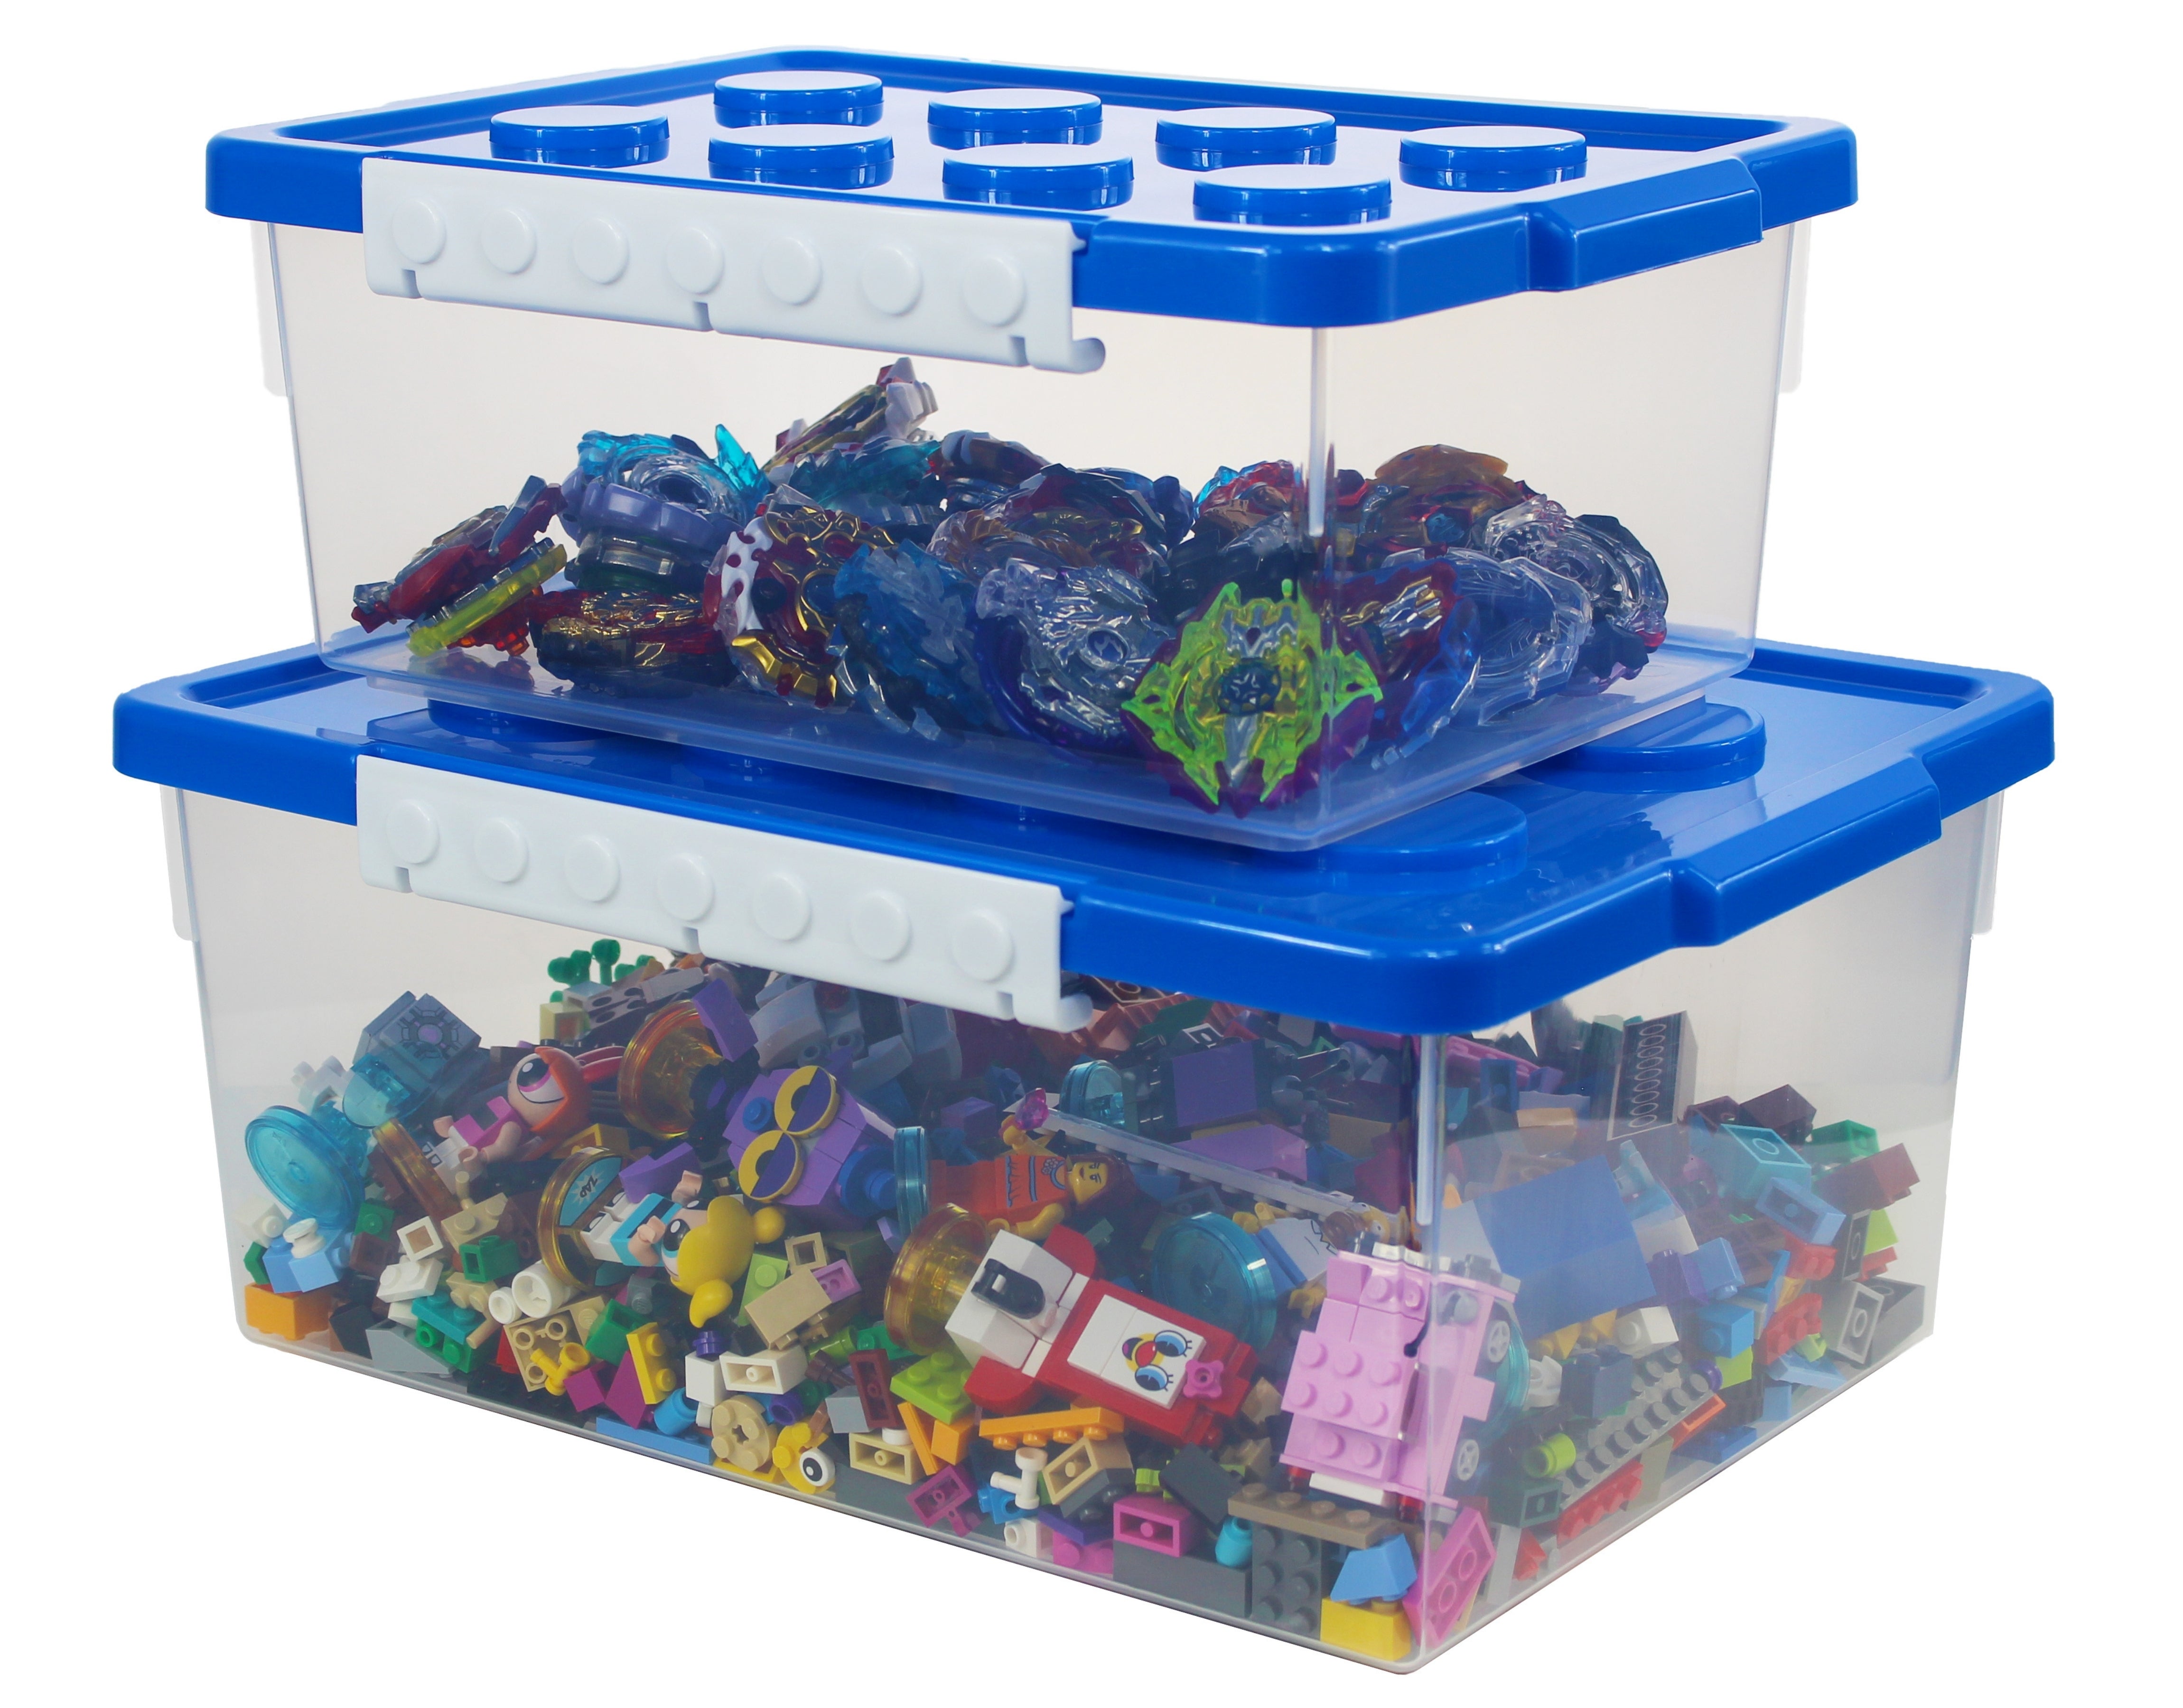 LEGO Storage & Containers for Kids